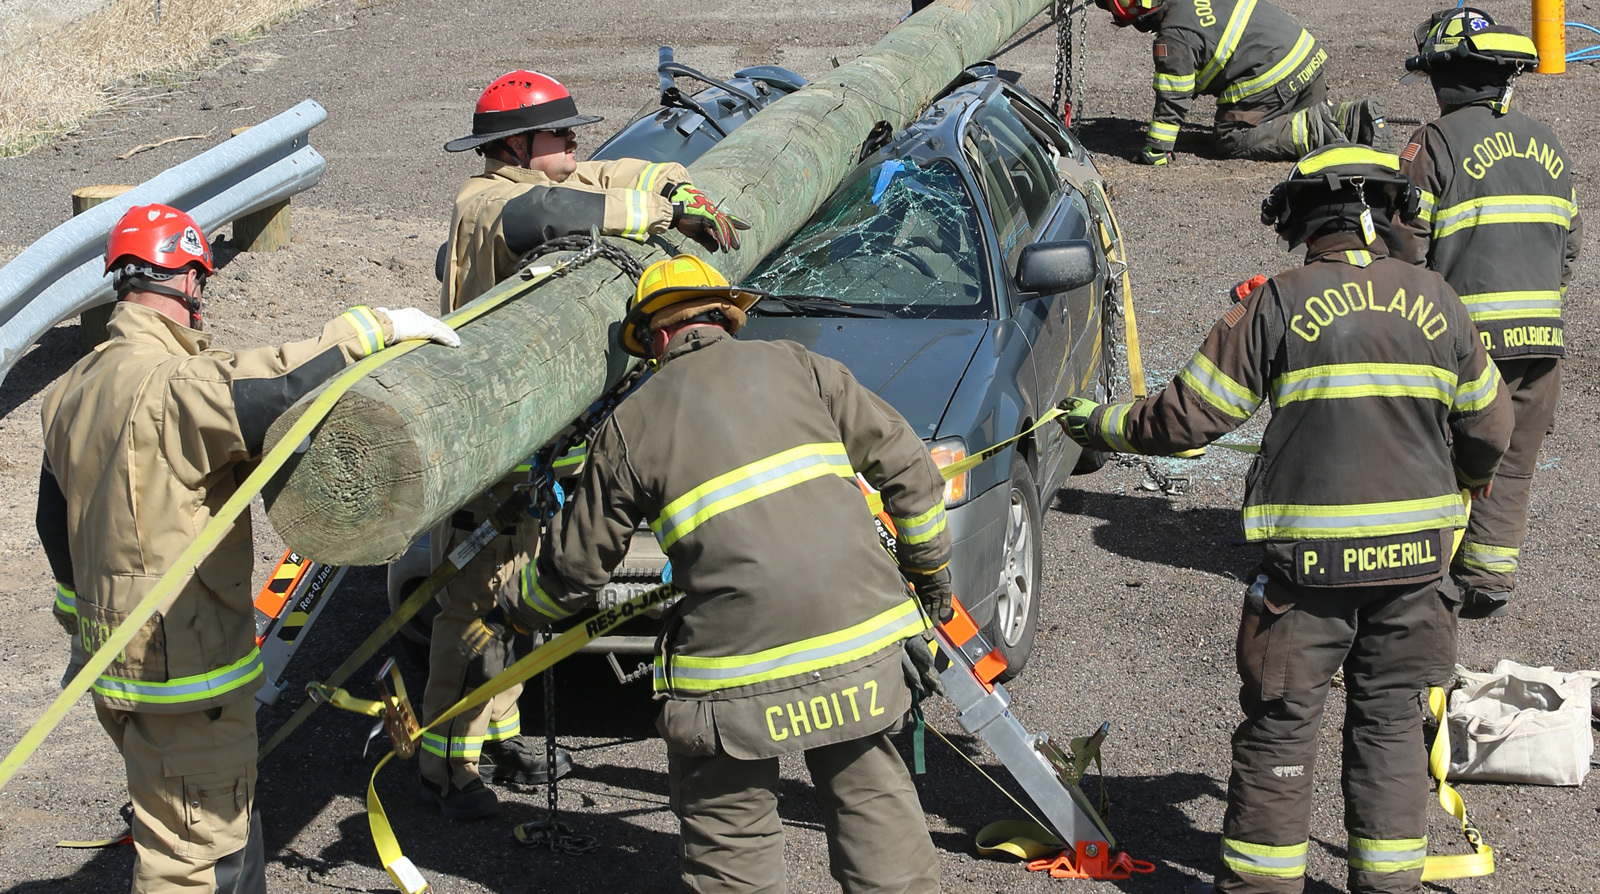 Firefighters participate in KFRTI’s Annual Fire School in Goodland, Kansas, in March.